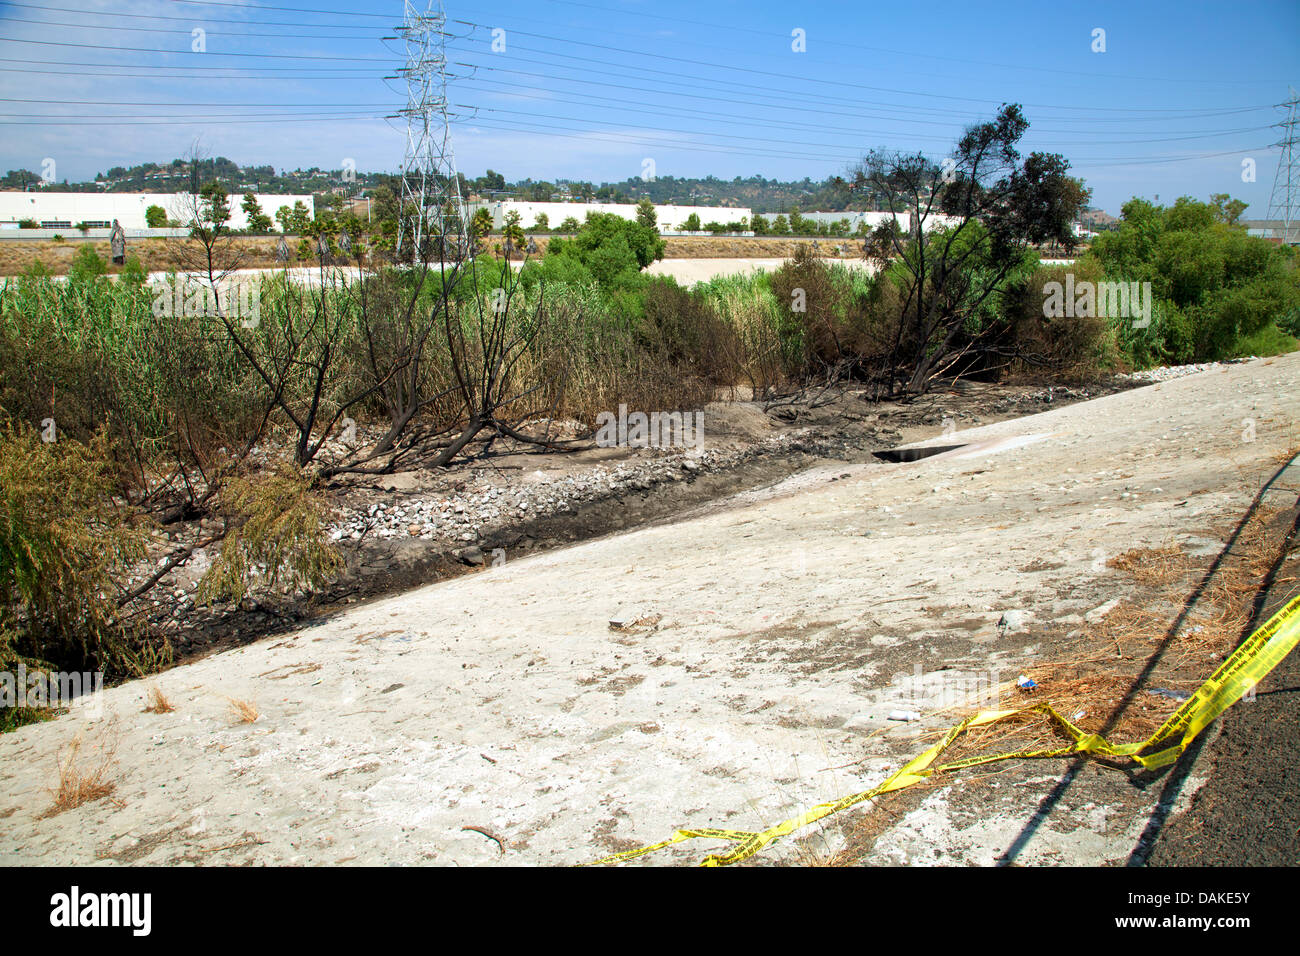 Los Angeles, USA. 13th July, 2013. Fire damage to Los Angeles River the day  after a tanker truck overturned on the nearby Interstate 5 near Elysian Valley spilling some of its 8500 gallons of gasoline which ran down a storm drain to the river. The overpowering smell of gas forced authorites to block off access to the river for the several hundred feet around the damage, several agencies includinf LADF and the EPA will be monitoring the situaion. The area was just recently opened for recreational use, including kayaking andf fishing, for the first time in 80 years. Stock Photo